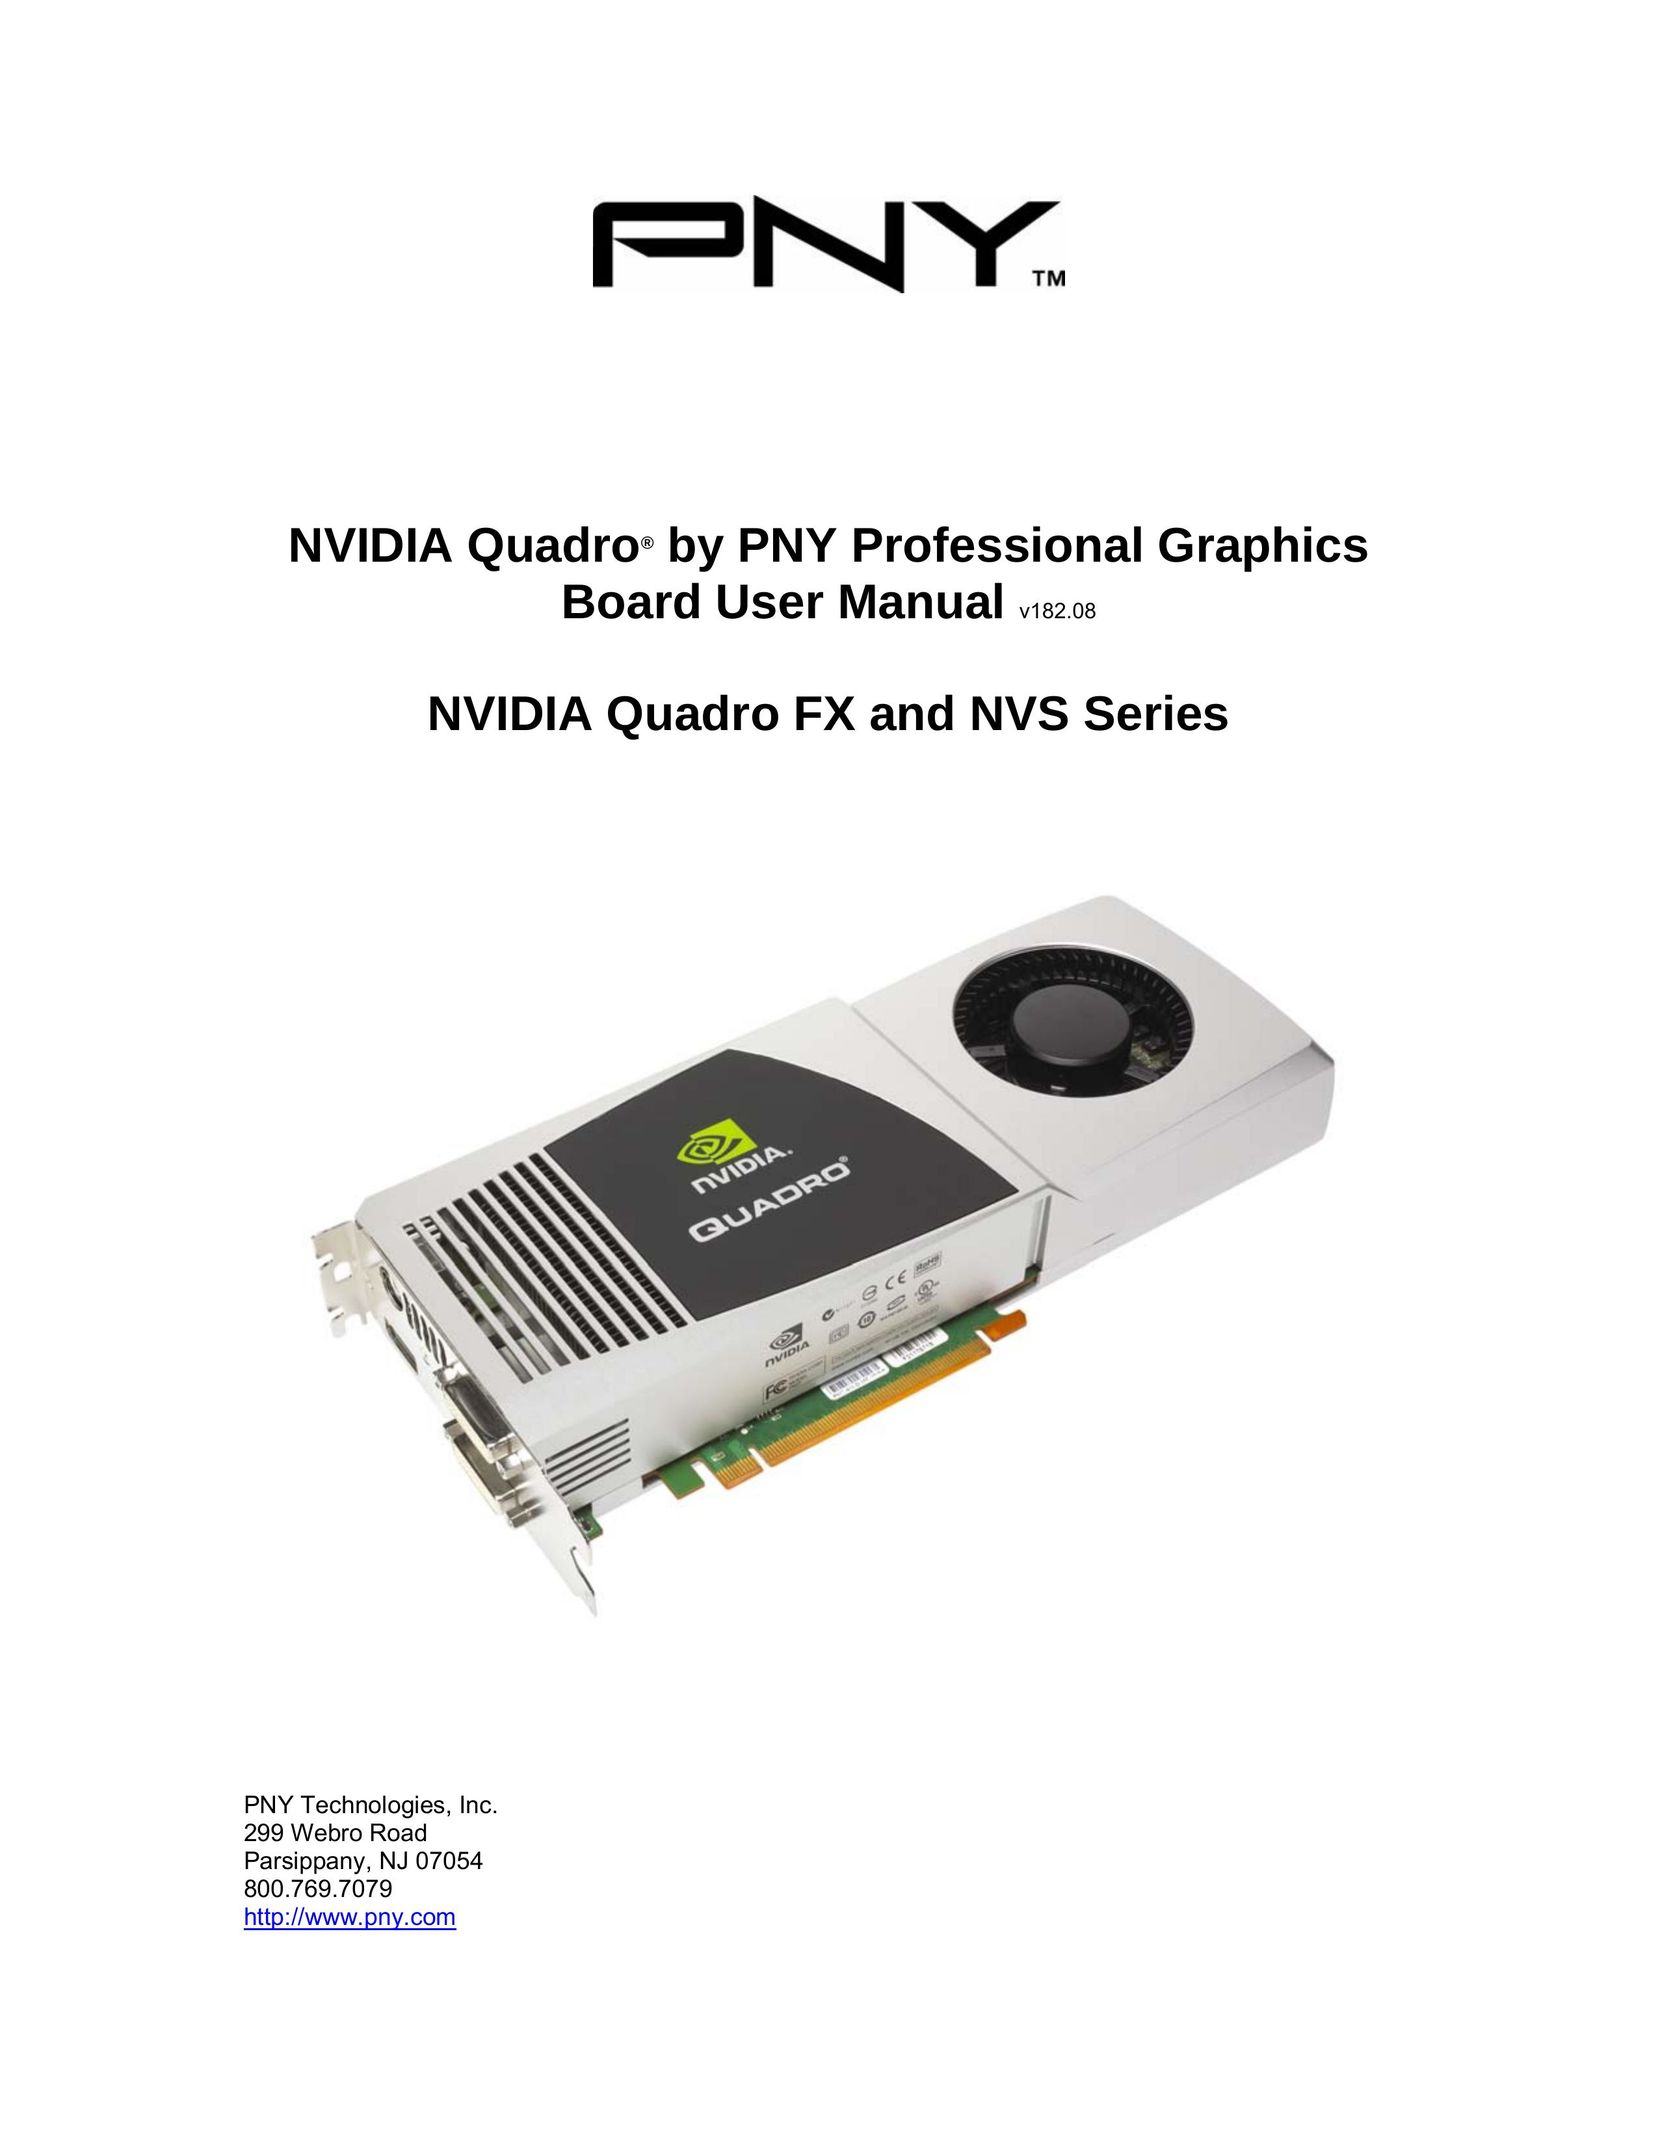 PNY FX 5500G Computer Hardware User Manual